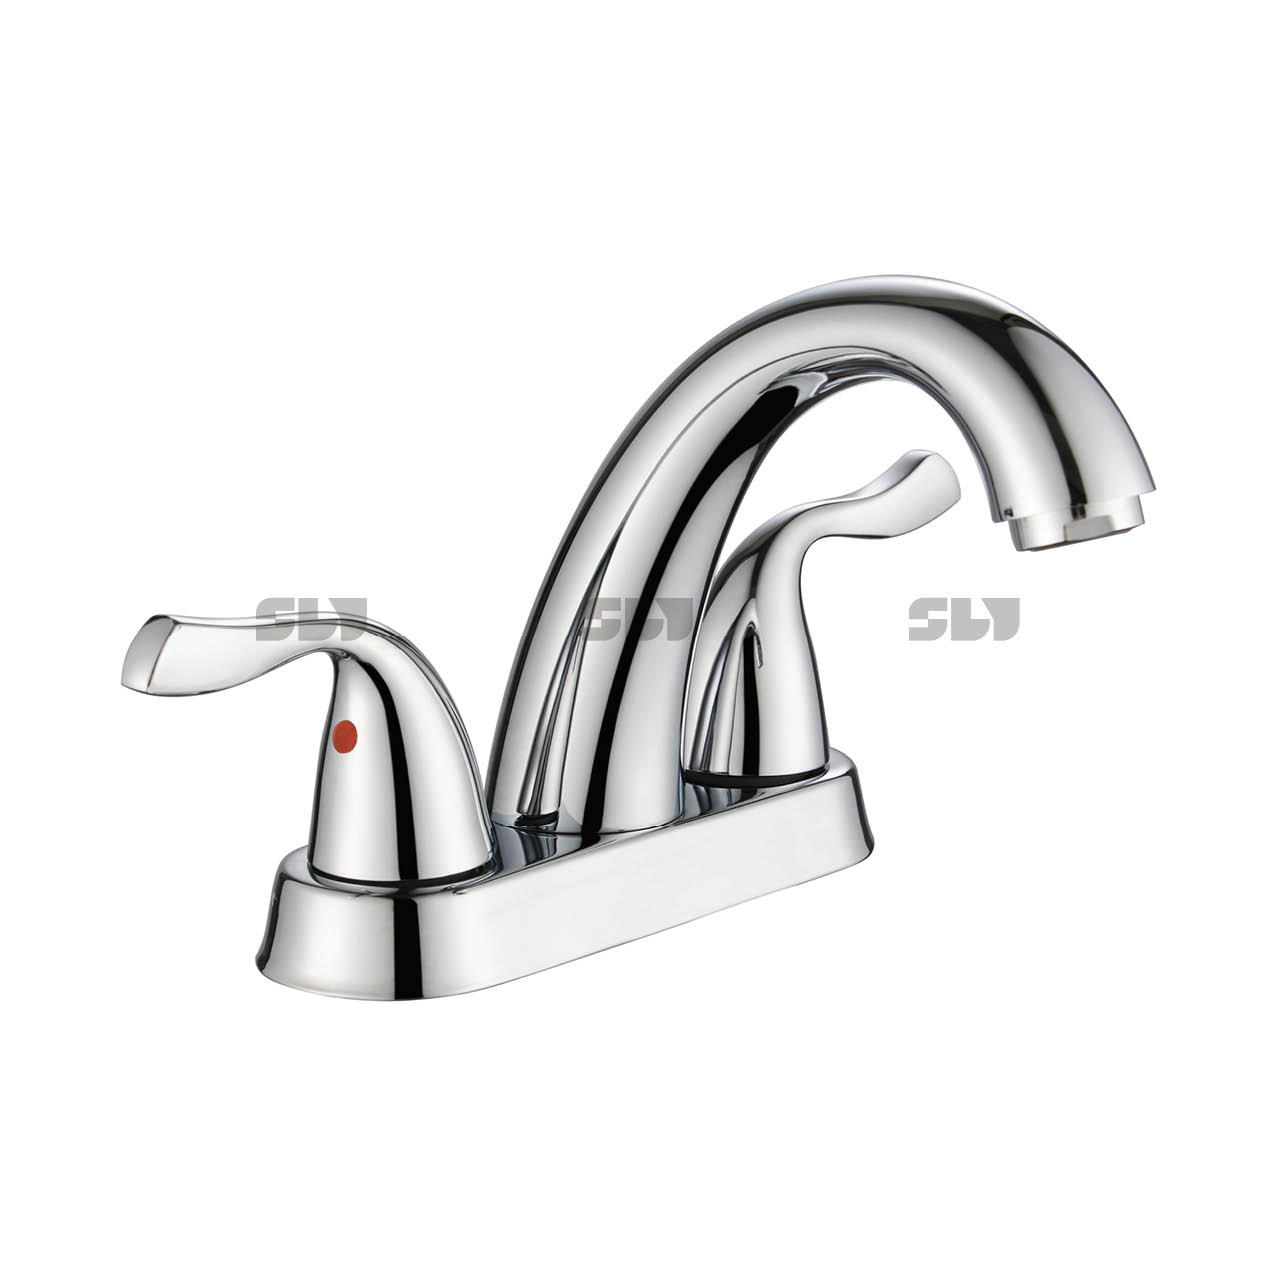 SLY Manufacturer Bathroom Wash Basin Faucet Water Tap Two Handle Hot And Cold Brushed Nickel Faucet